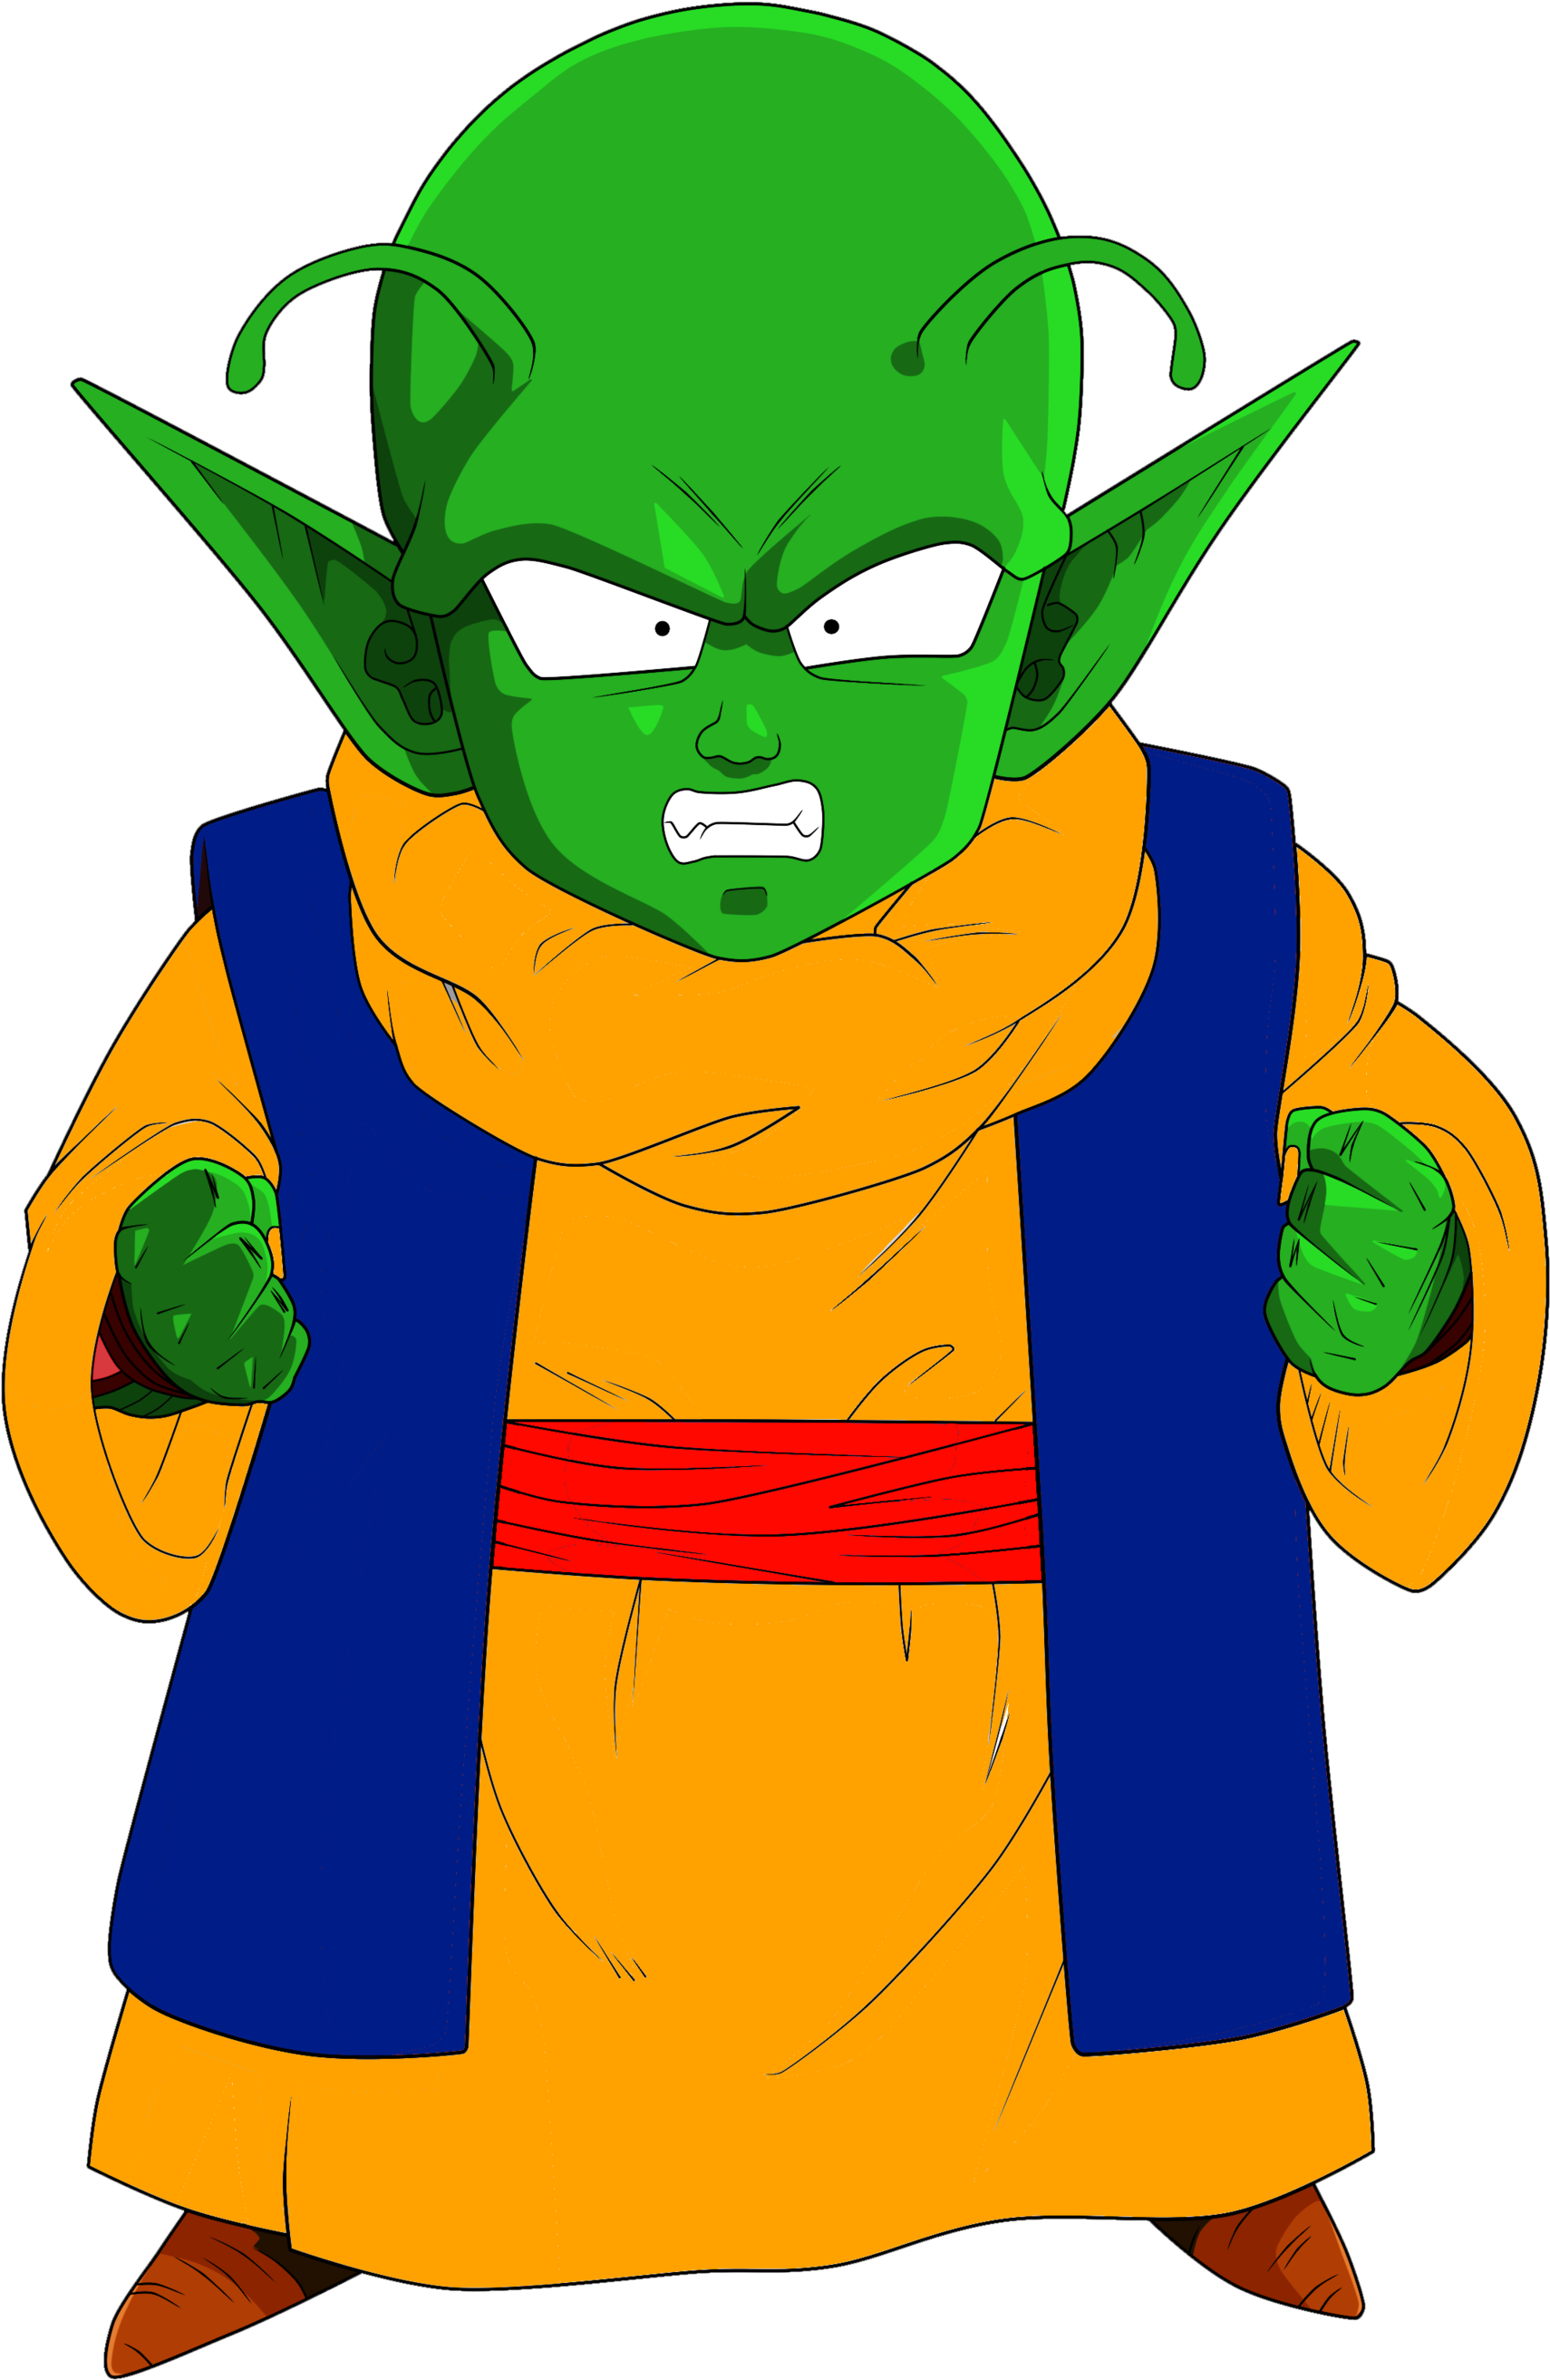 Dende PNG HD Quality